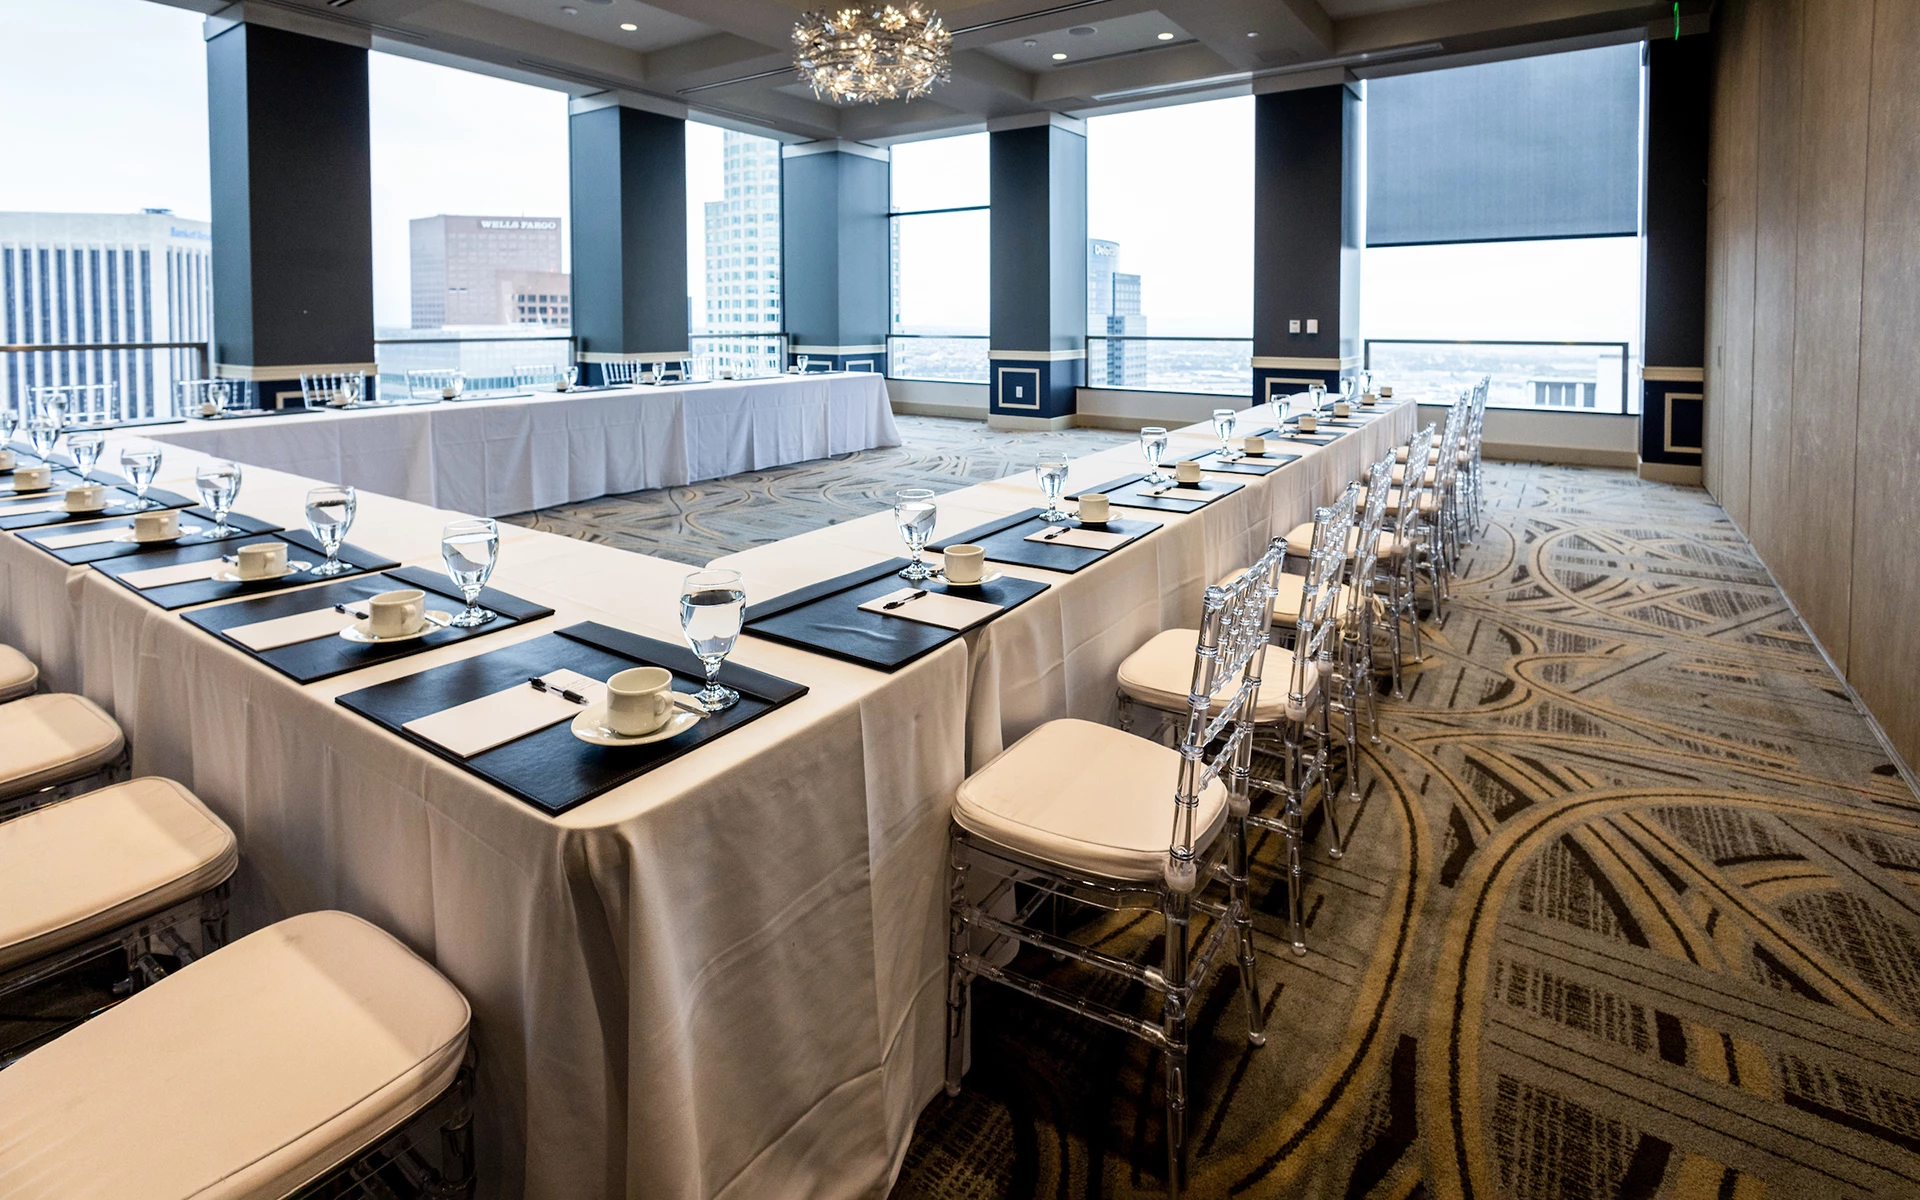 Business Meetings at City Club LA: Personalized Service and Professional Accommodations